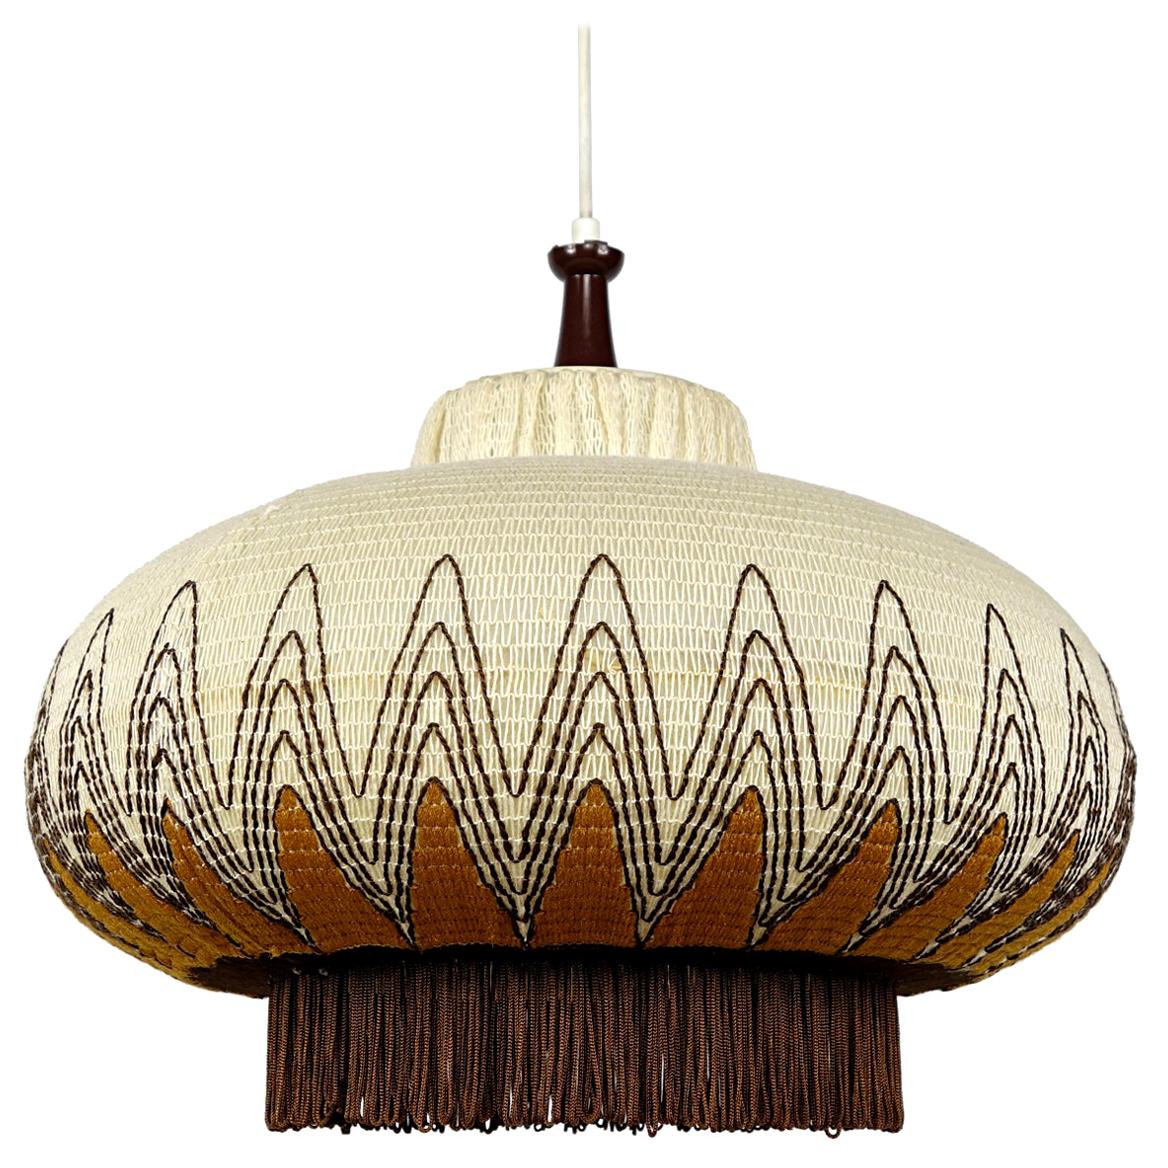 Mid-Century Modern Plastic Pendant with Embroidery and Fringes in Chinoiserie